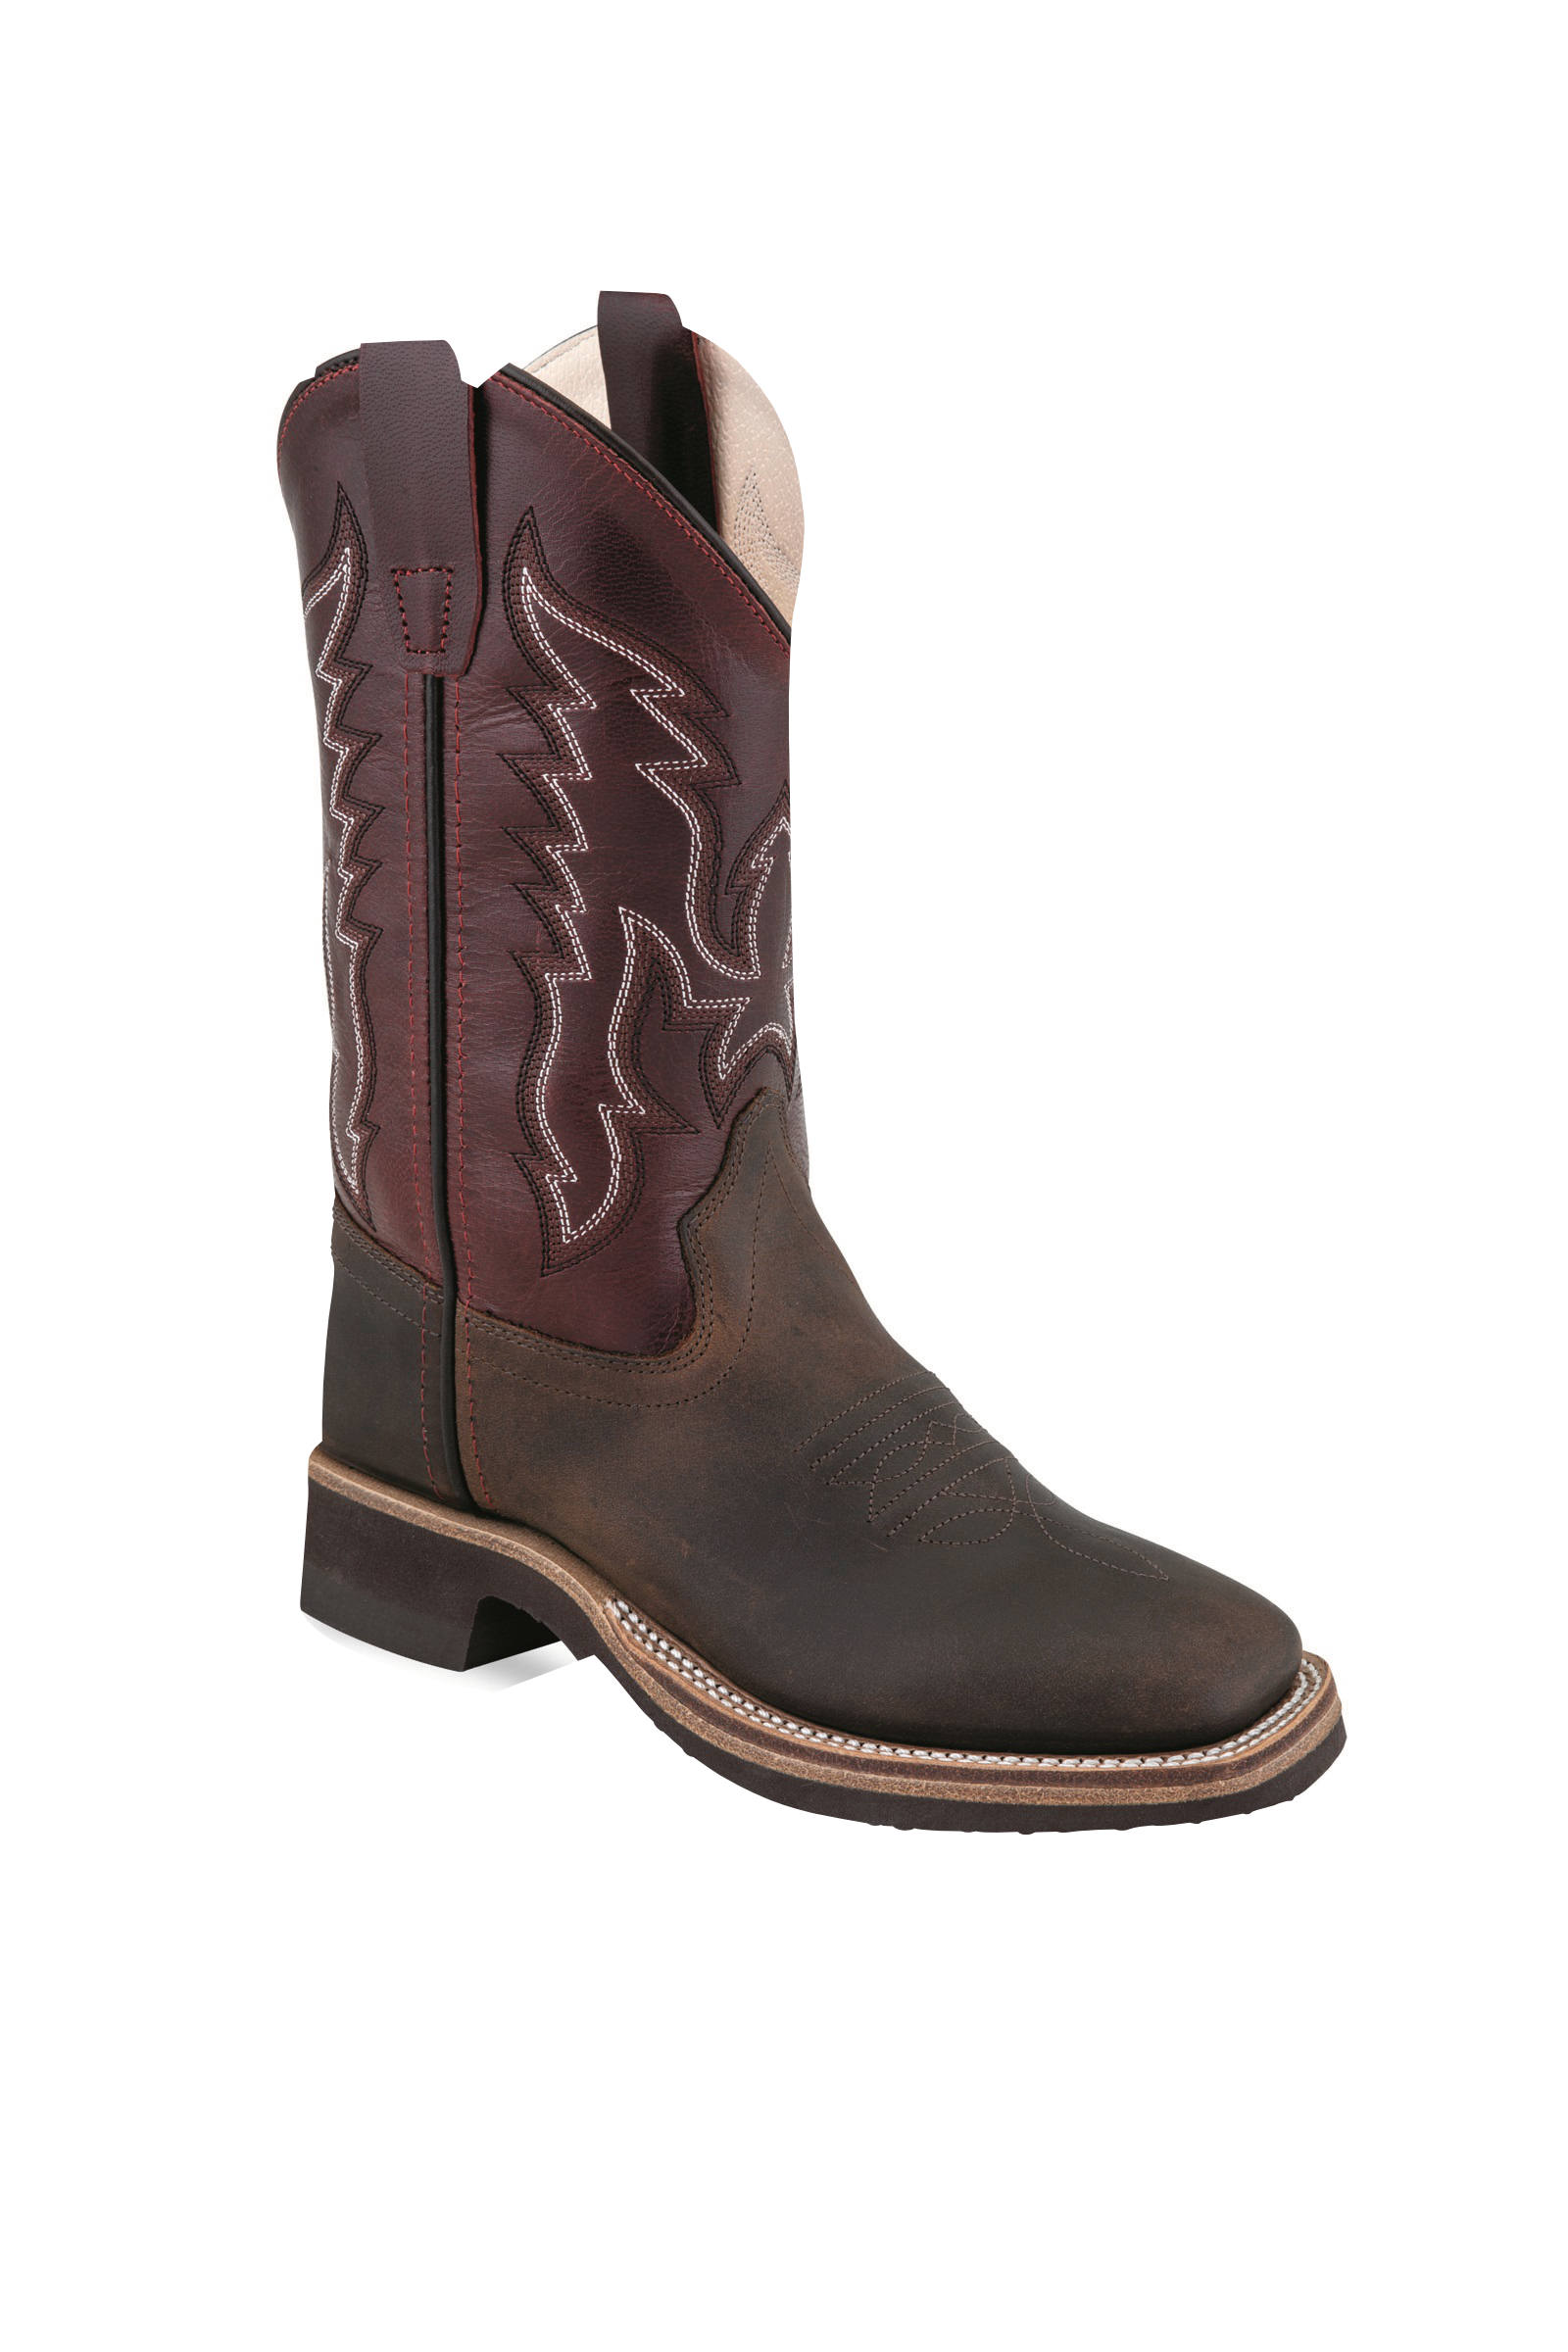 Cowboy boots for children BSC1889, red-brown